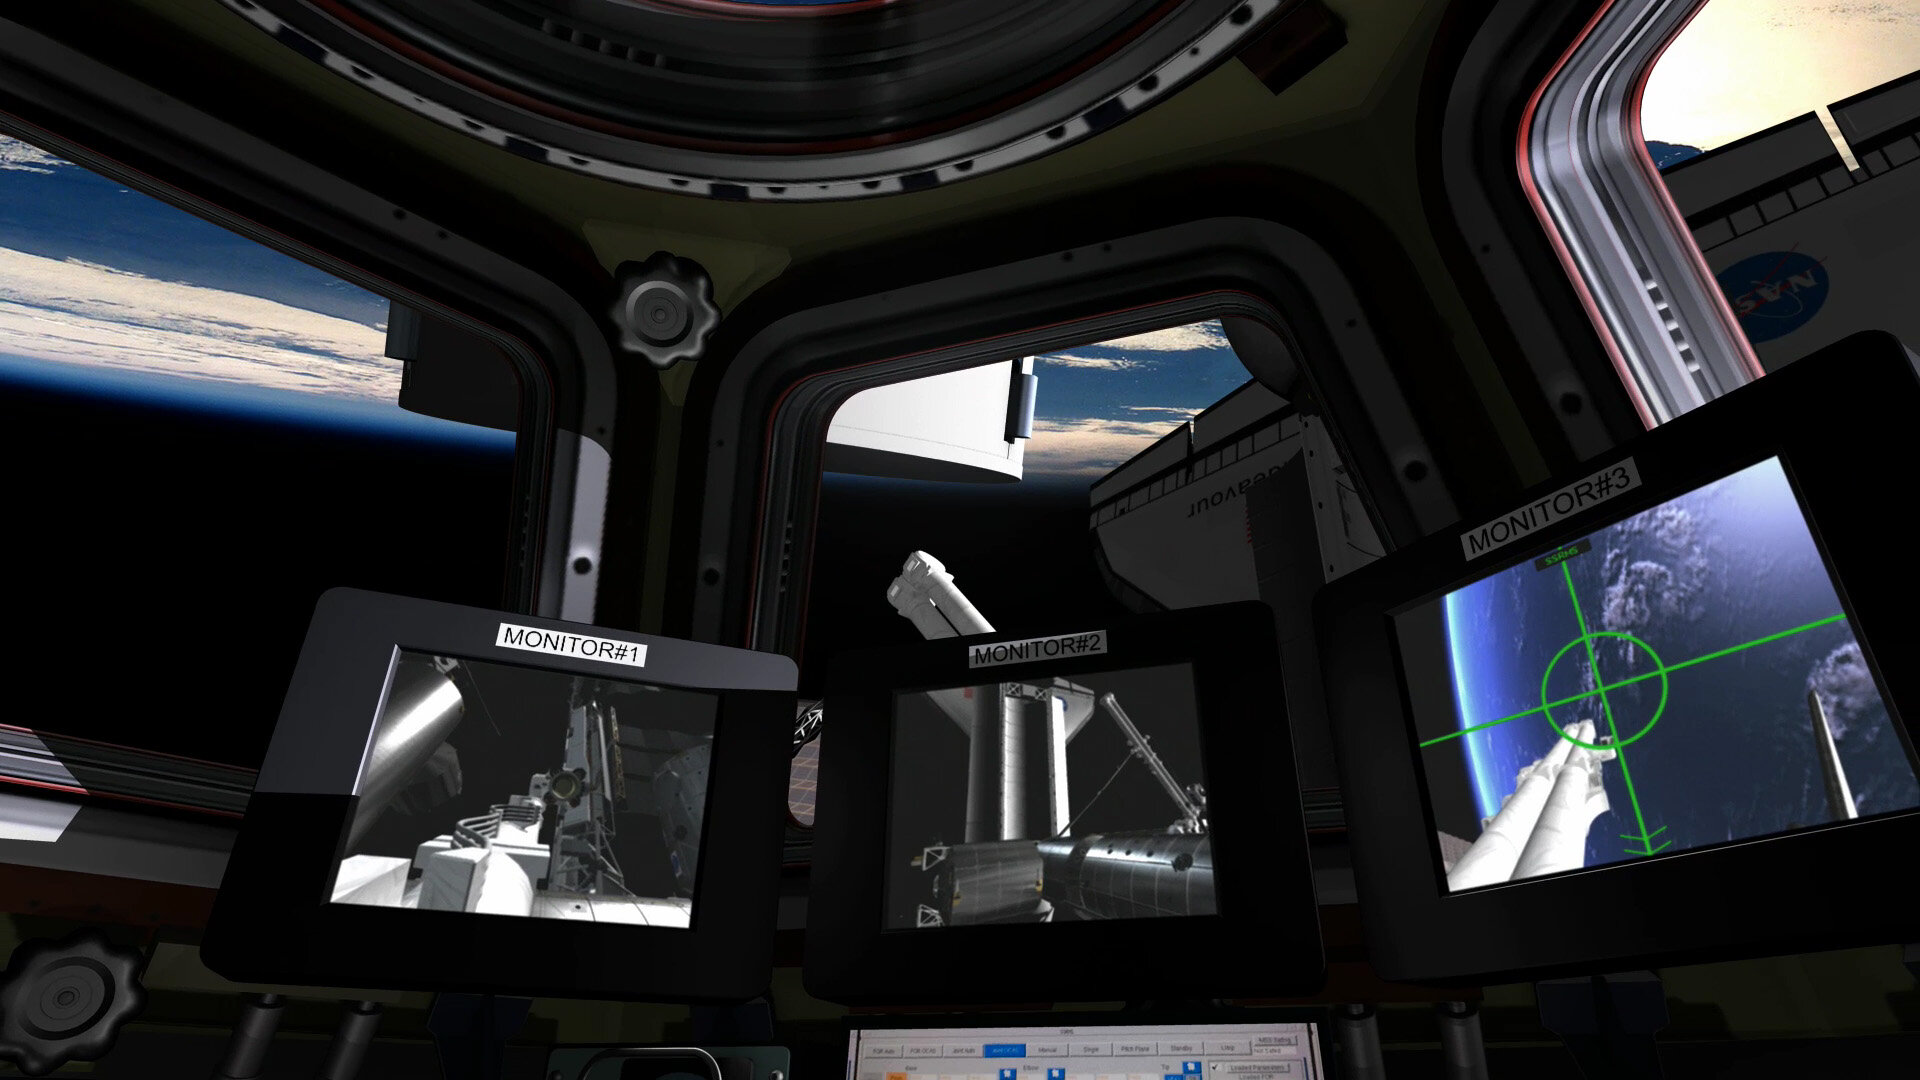 Cupola has a perfect view to monitor spacewalks and approaching spacecraft